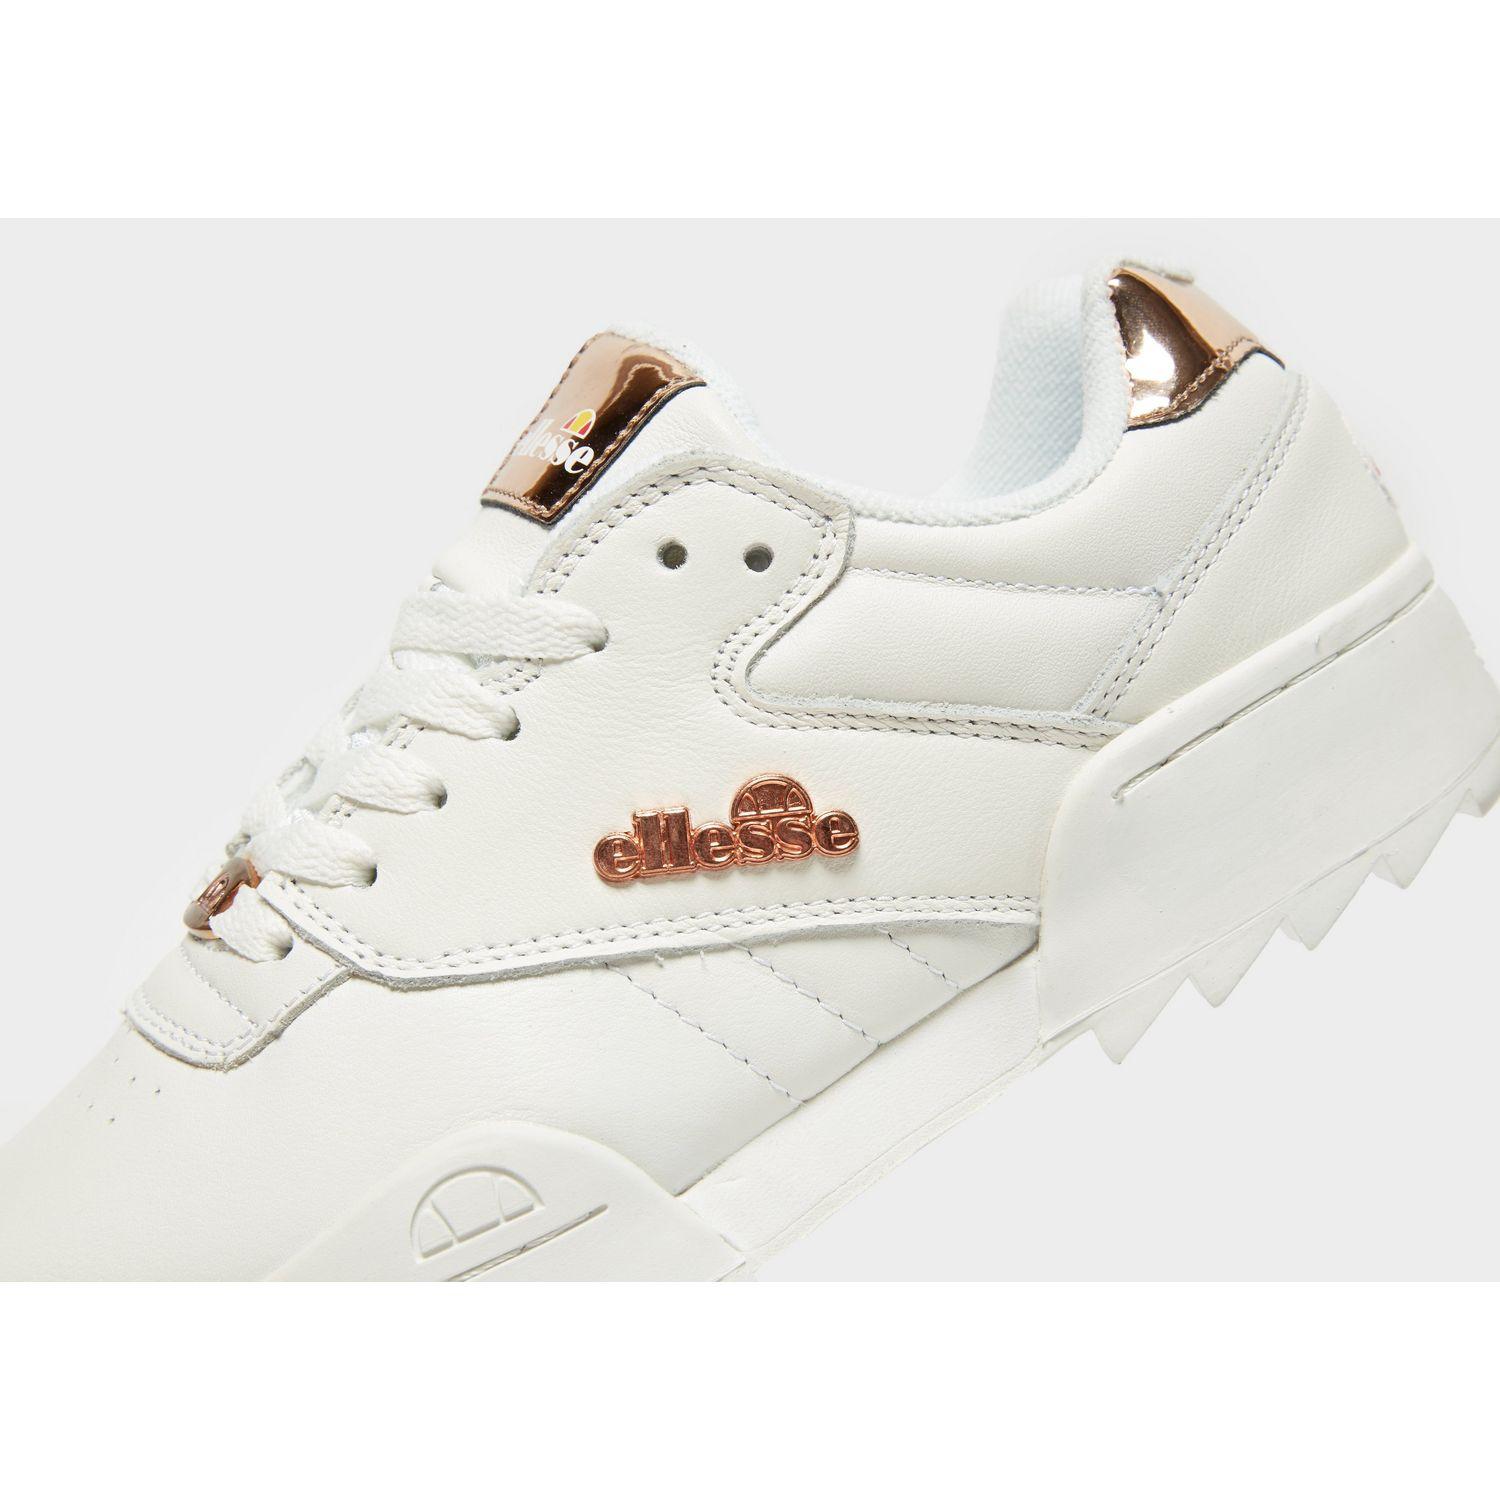 ellesse rose gold trainers